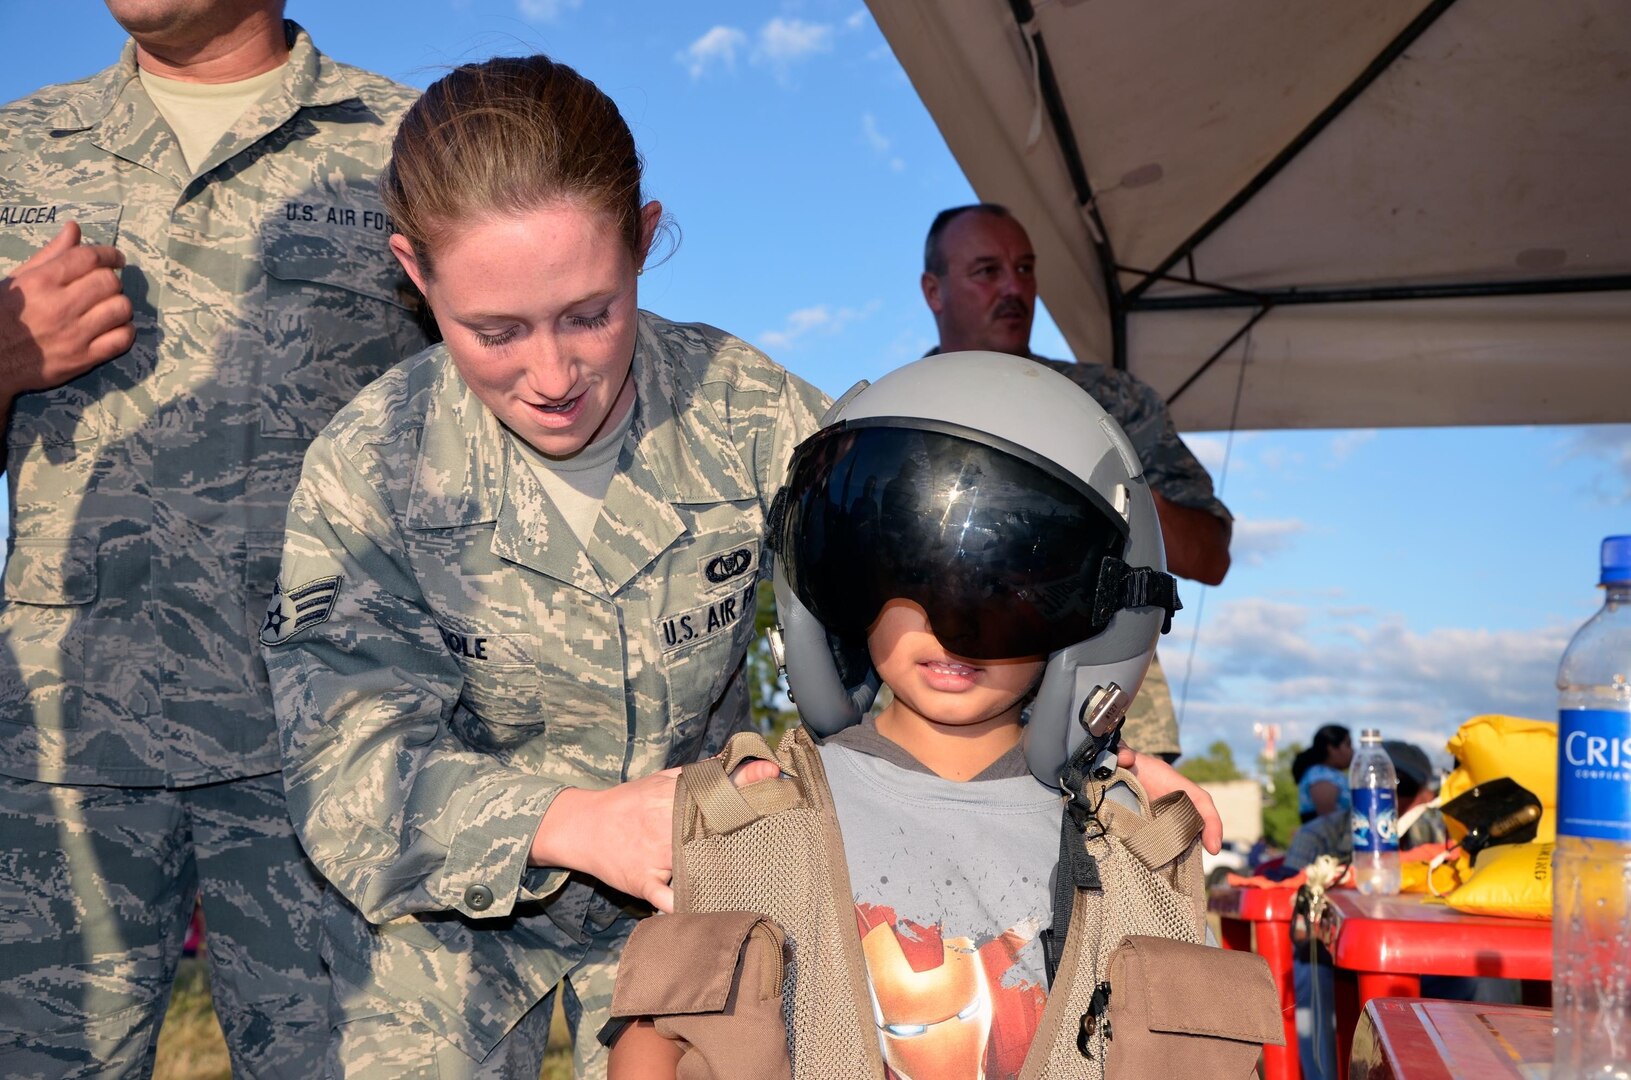 Senior Airman Beverly Cole, with the New Hampsire Air National Guard's 157th Air Refueling Wing, assists a Salvadoran child with wearing an aircrew flight helmet and vest at the 2013 Ilopango Air Show in Ilopango, El Salvador as part of the State Partnership Program, Jan. 26. The New Hampshire National Guard has partnered with El Salvador as part of the SPP since 2000 and has taken part in numerous yearly subject matter expert exchanges.